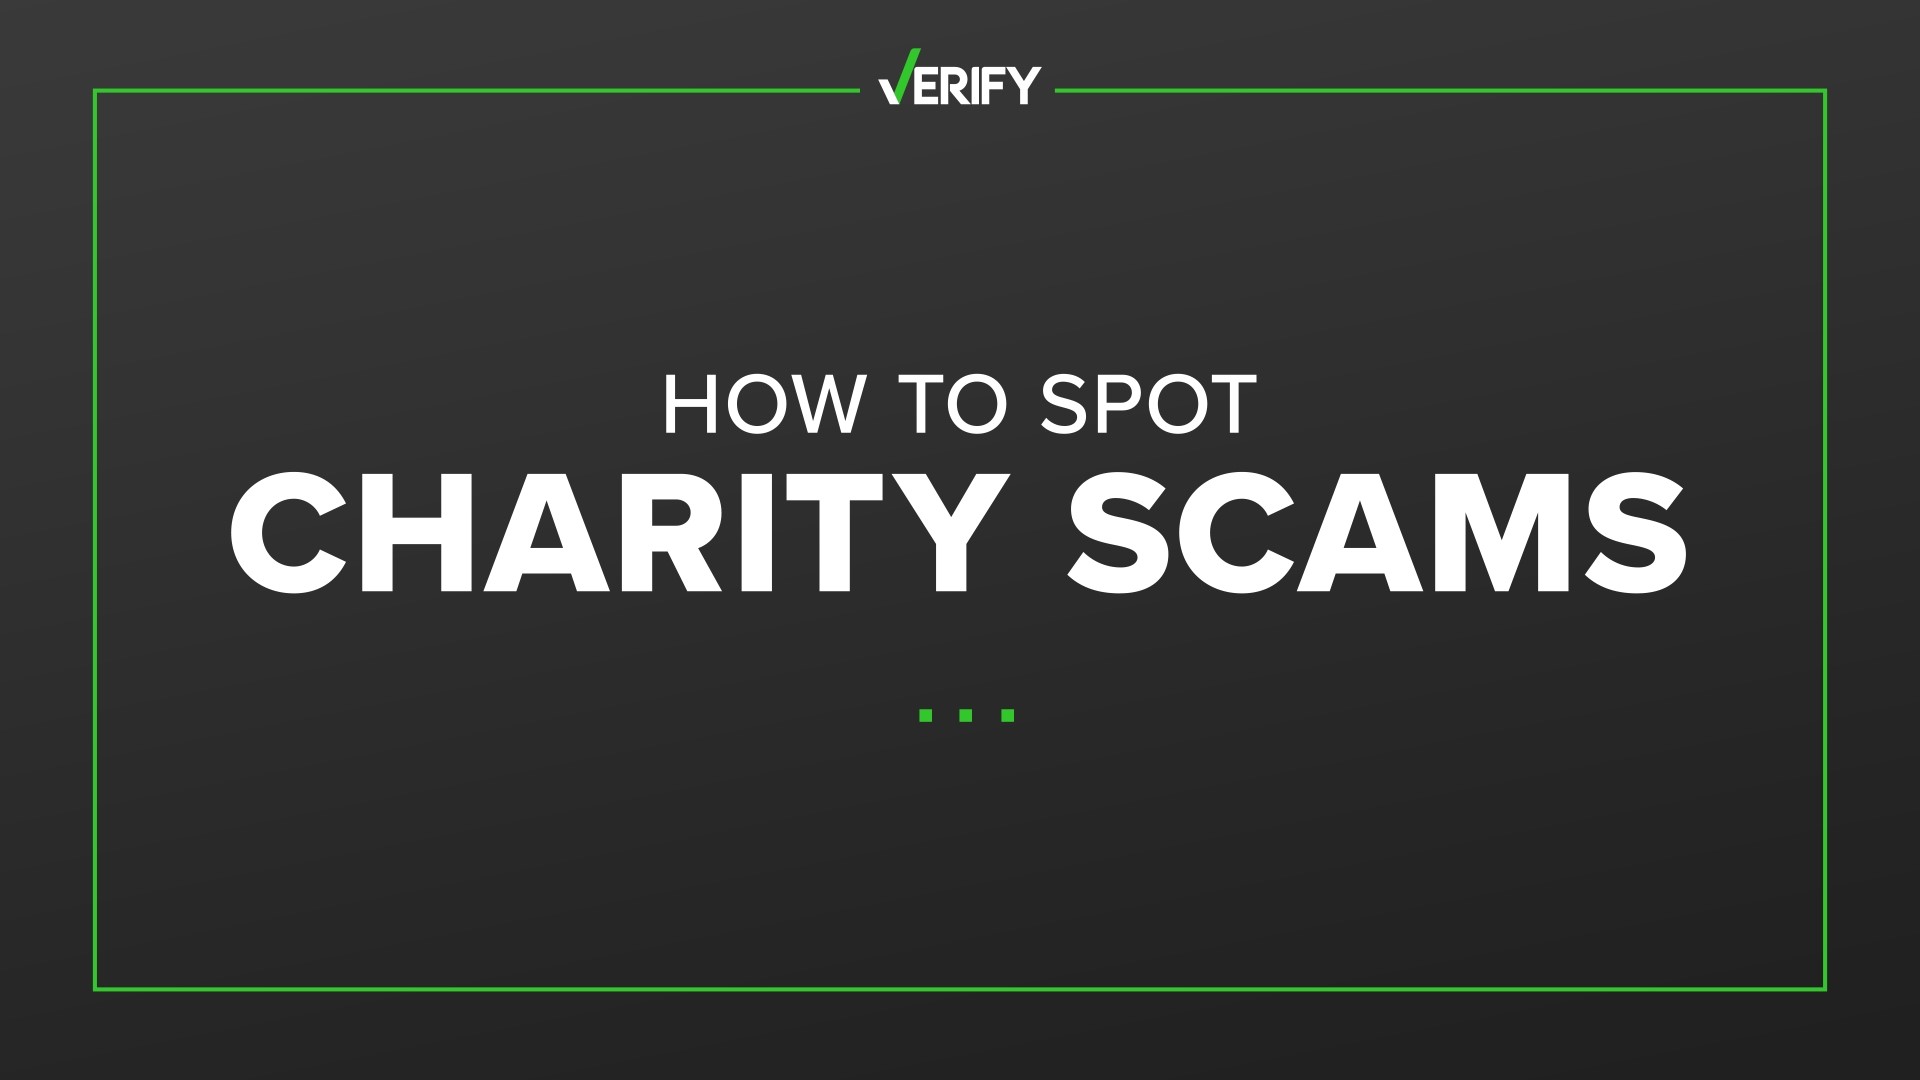 VERIFY viewers often ask about charity scams. Here are four ways to make sure your donation is in the right hands.